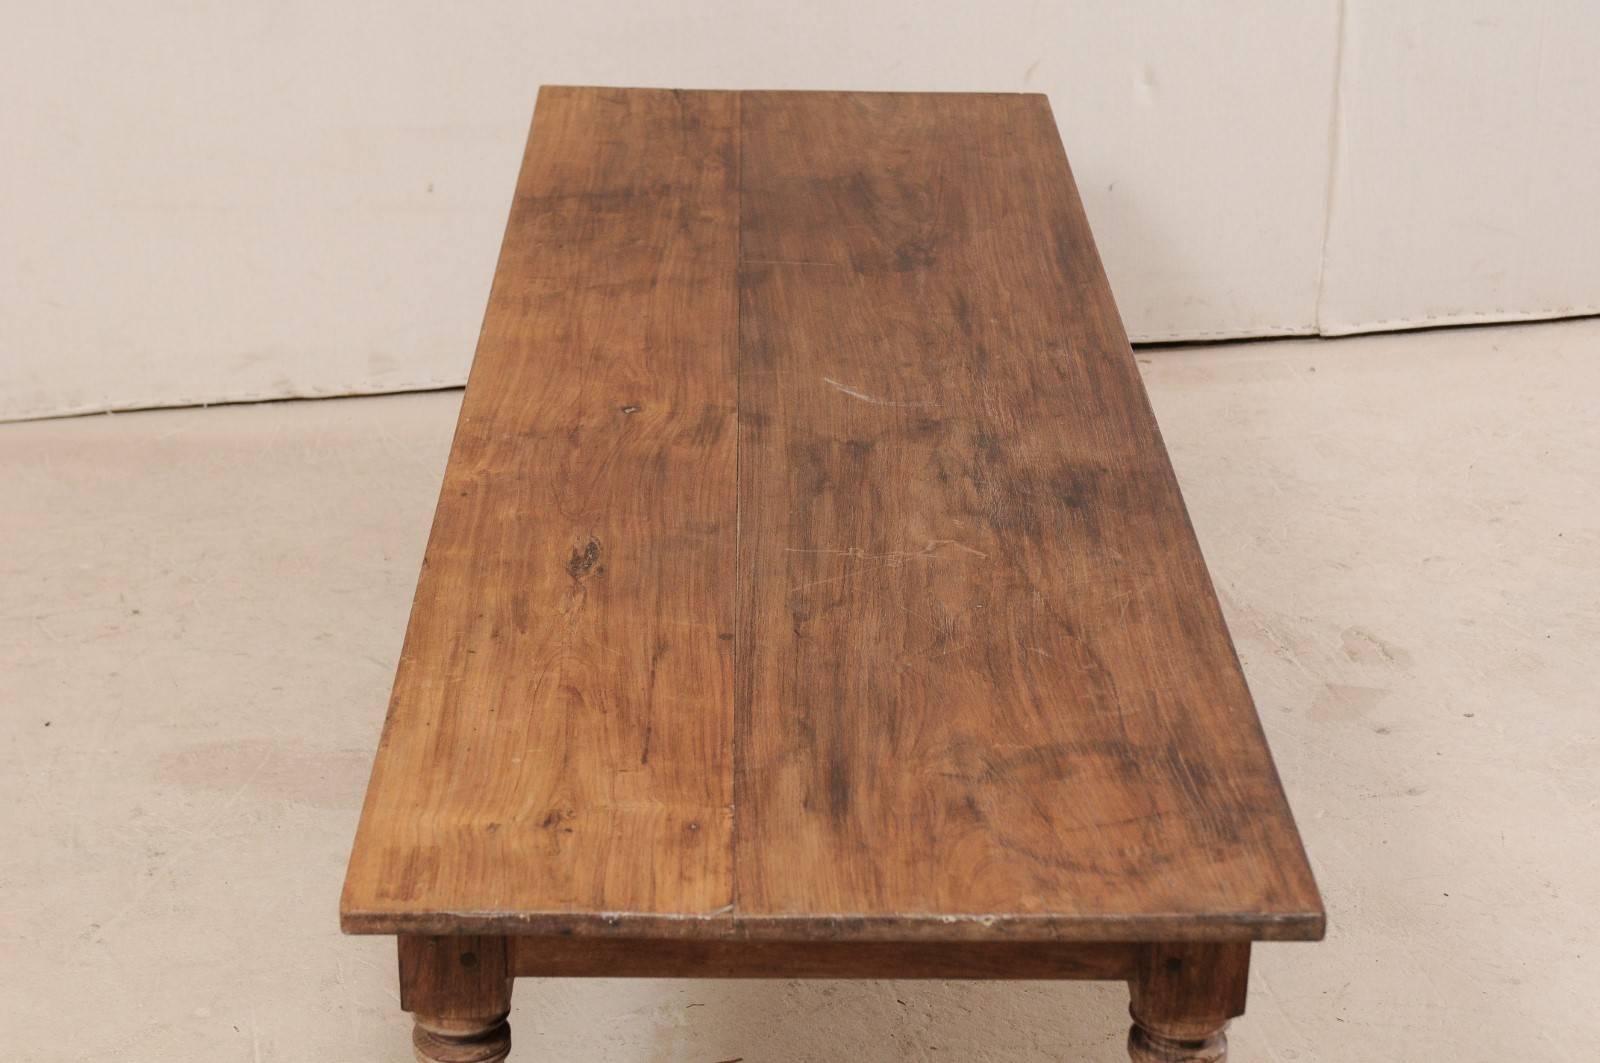 Antique Brazilian Wood Table or Bench from the Early 20th Century 1